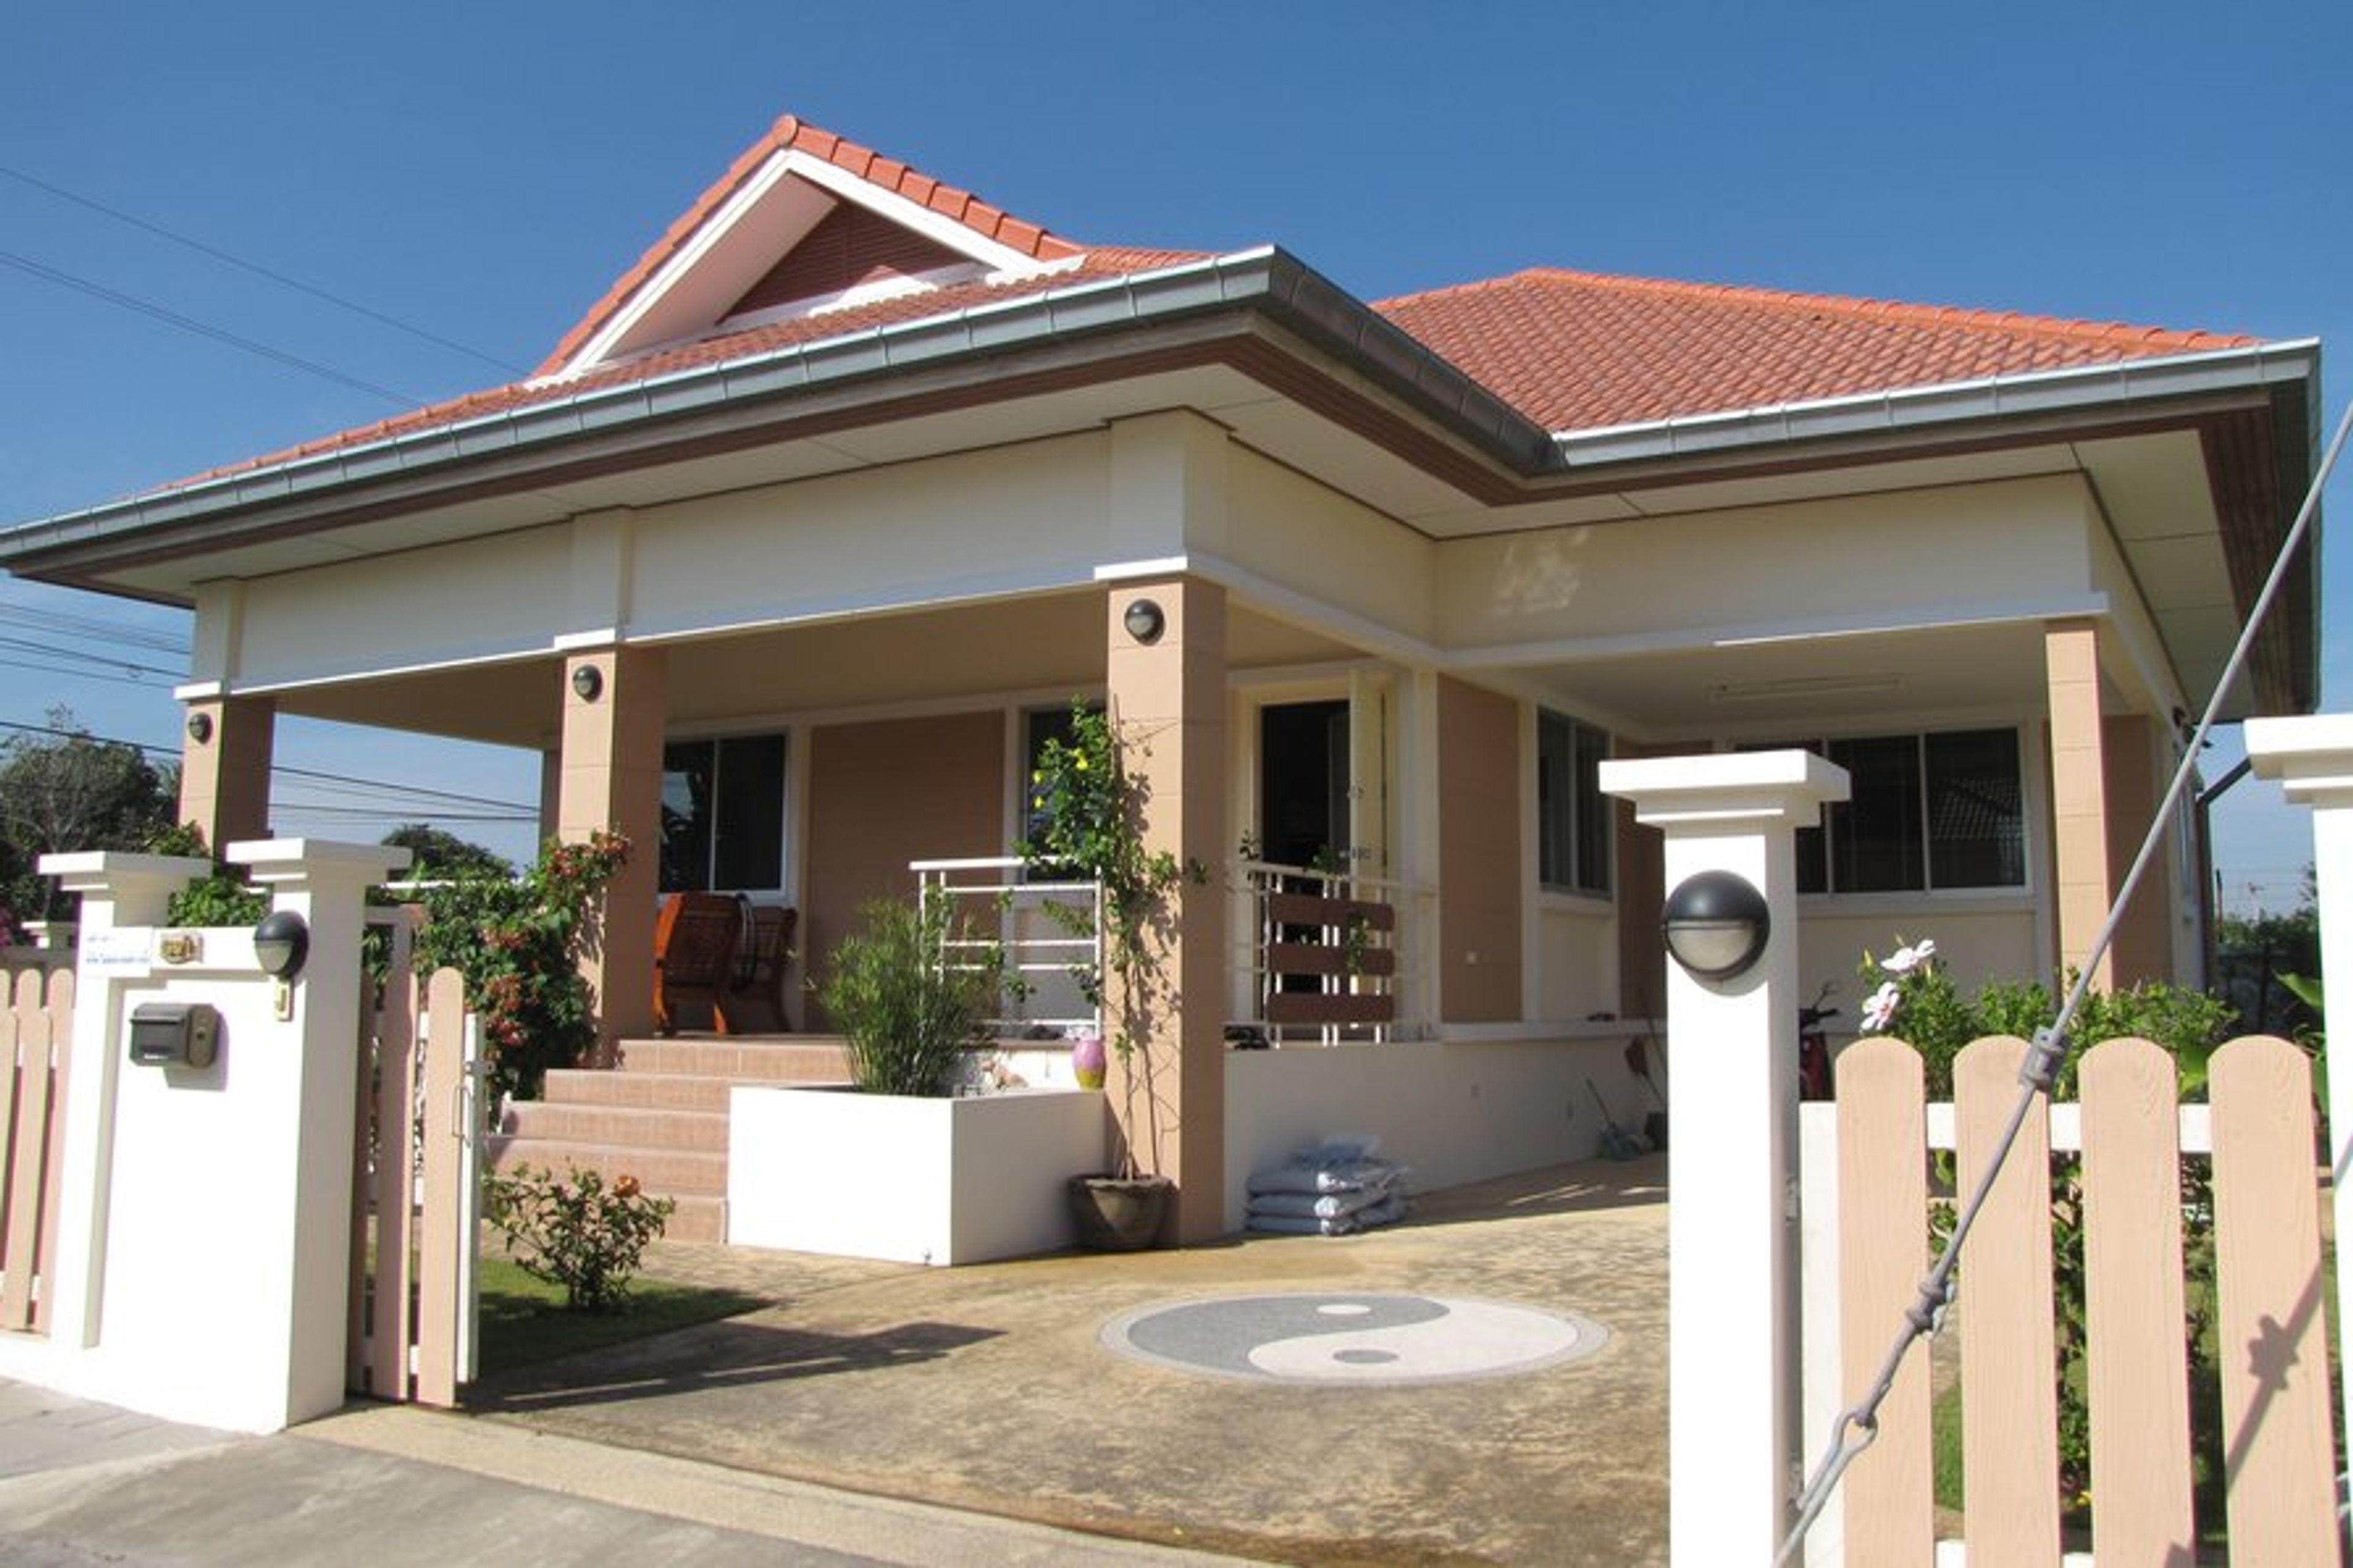 Front of the Villa